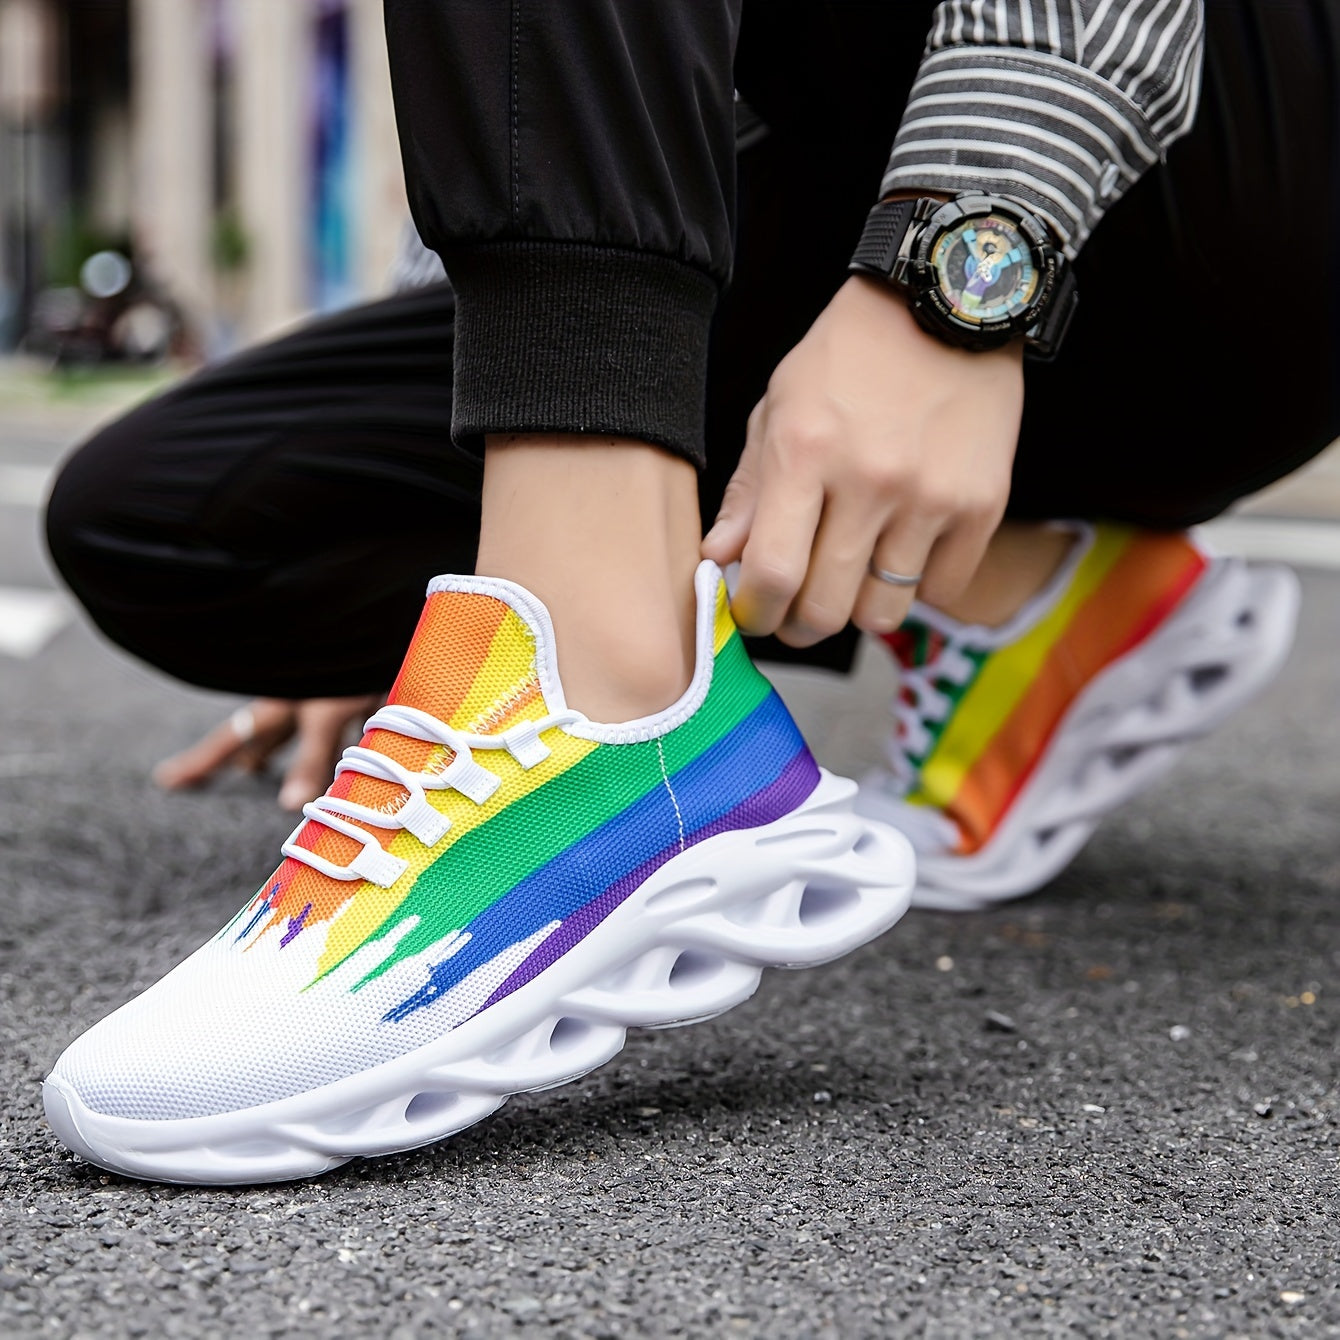 Men's Slip-on Blade Sneakers With Shoelaces - Rainbow Color Odor-resistant Athletic Shoes - Lightweight And Breathable